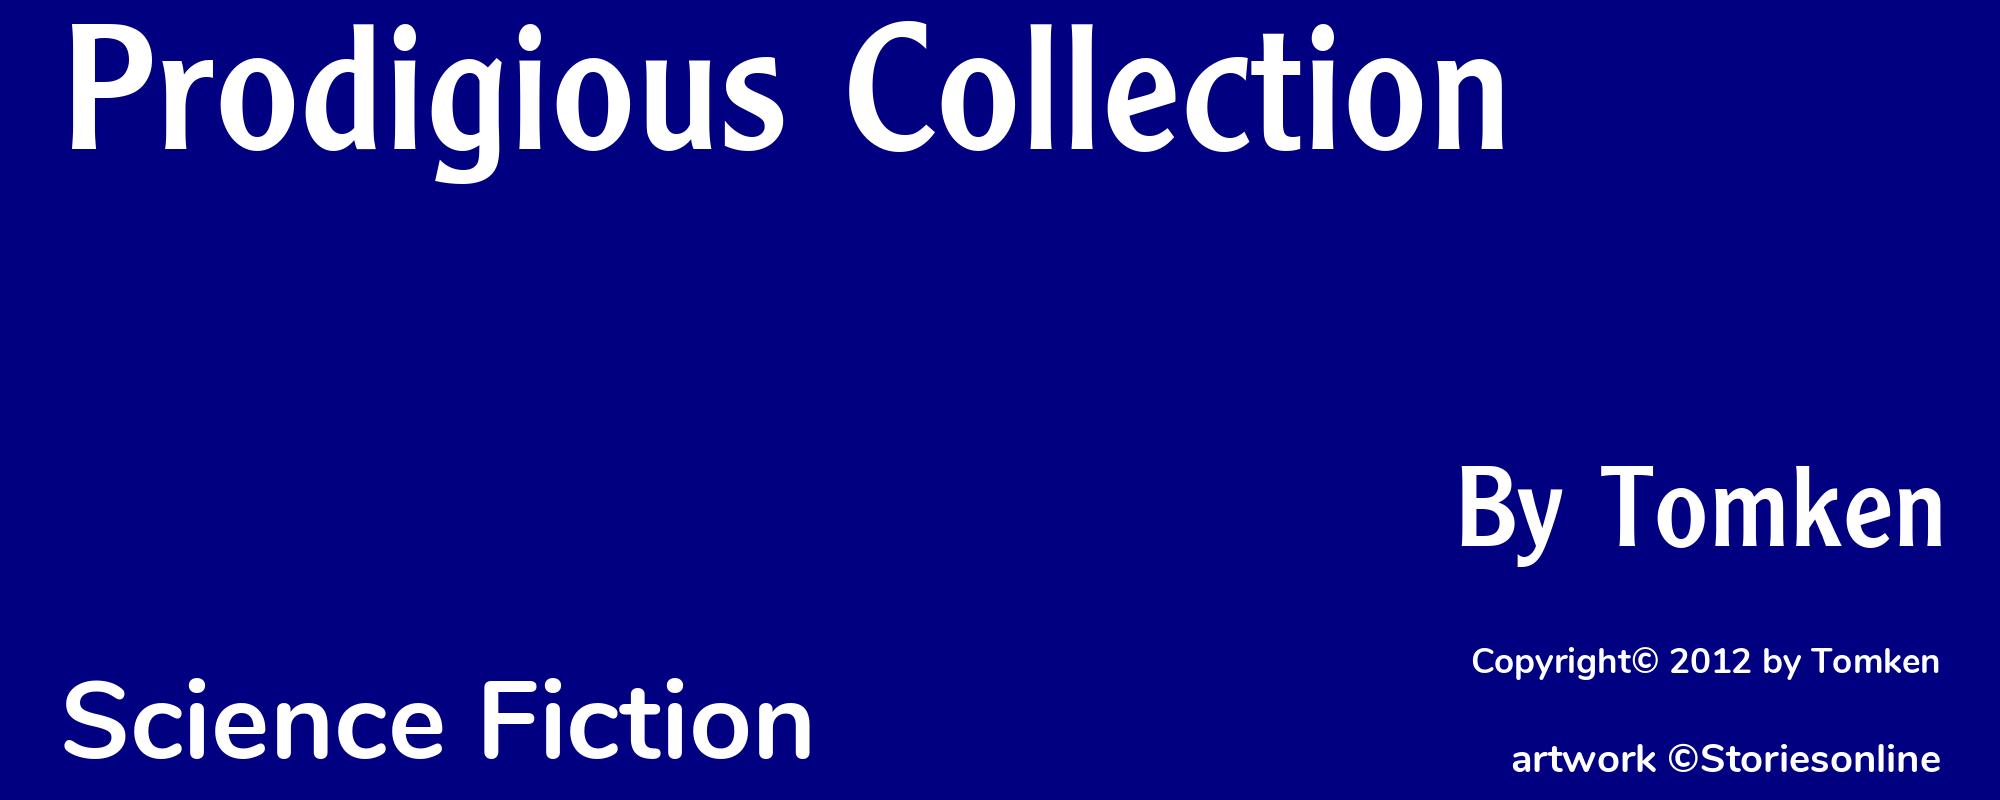 Prodigious Collection - Cover